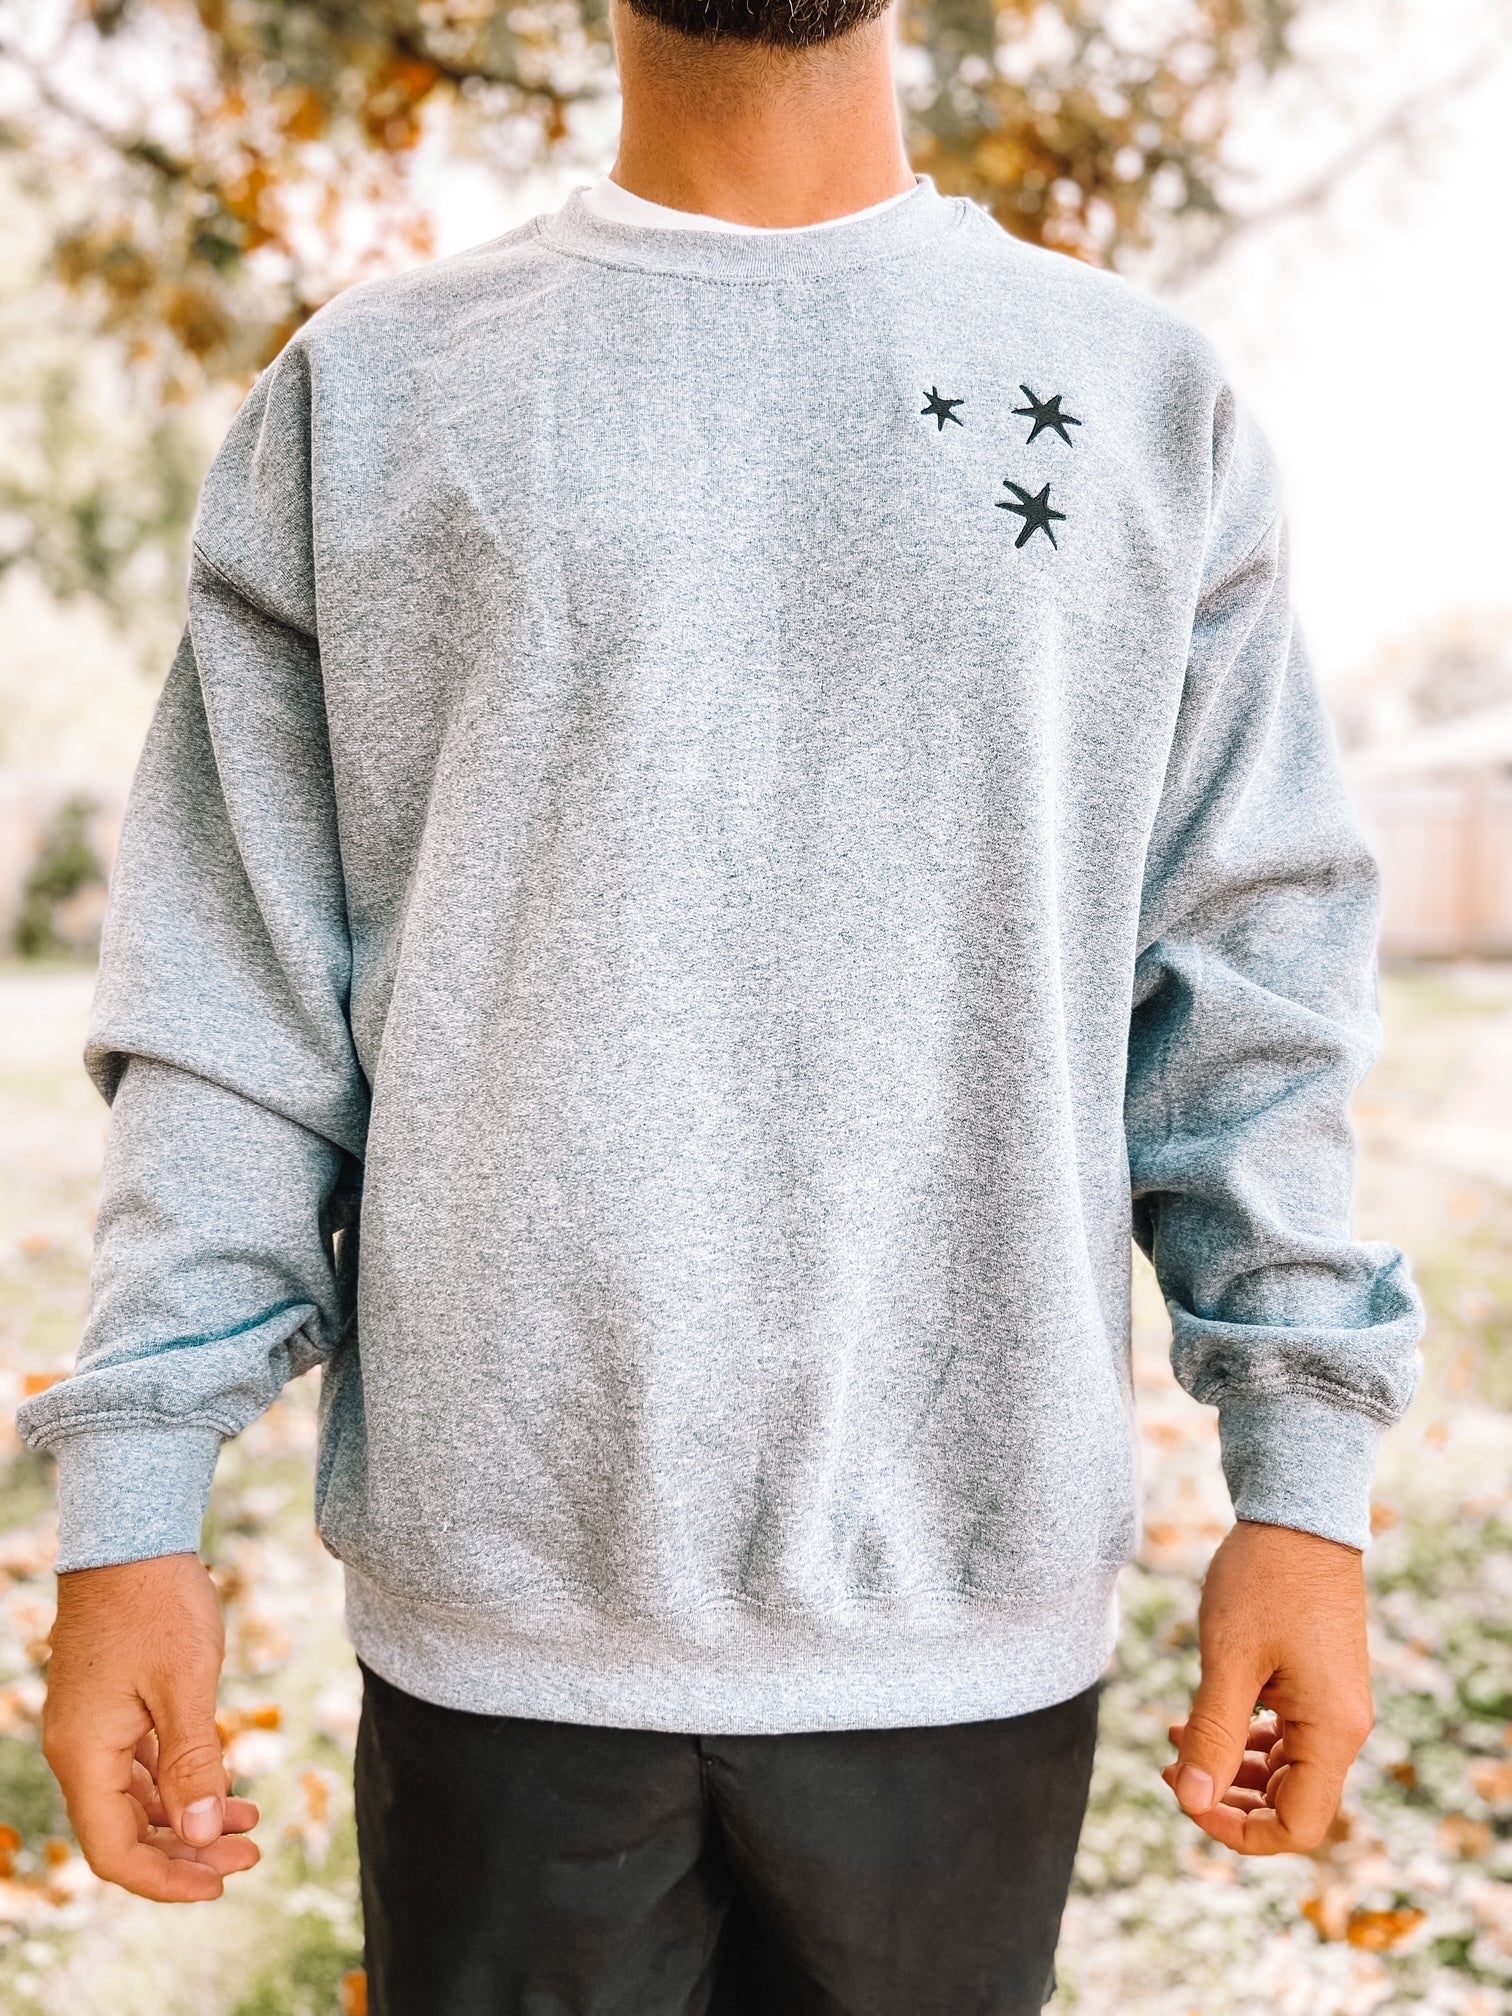 man wearing Charcoal Gray sweatshirt with 3 black embroidered stars on the left chest.